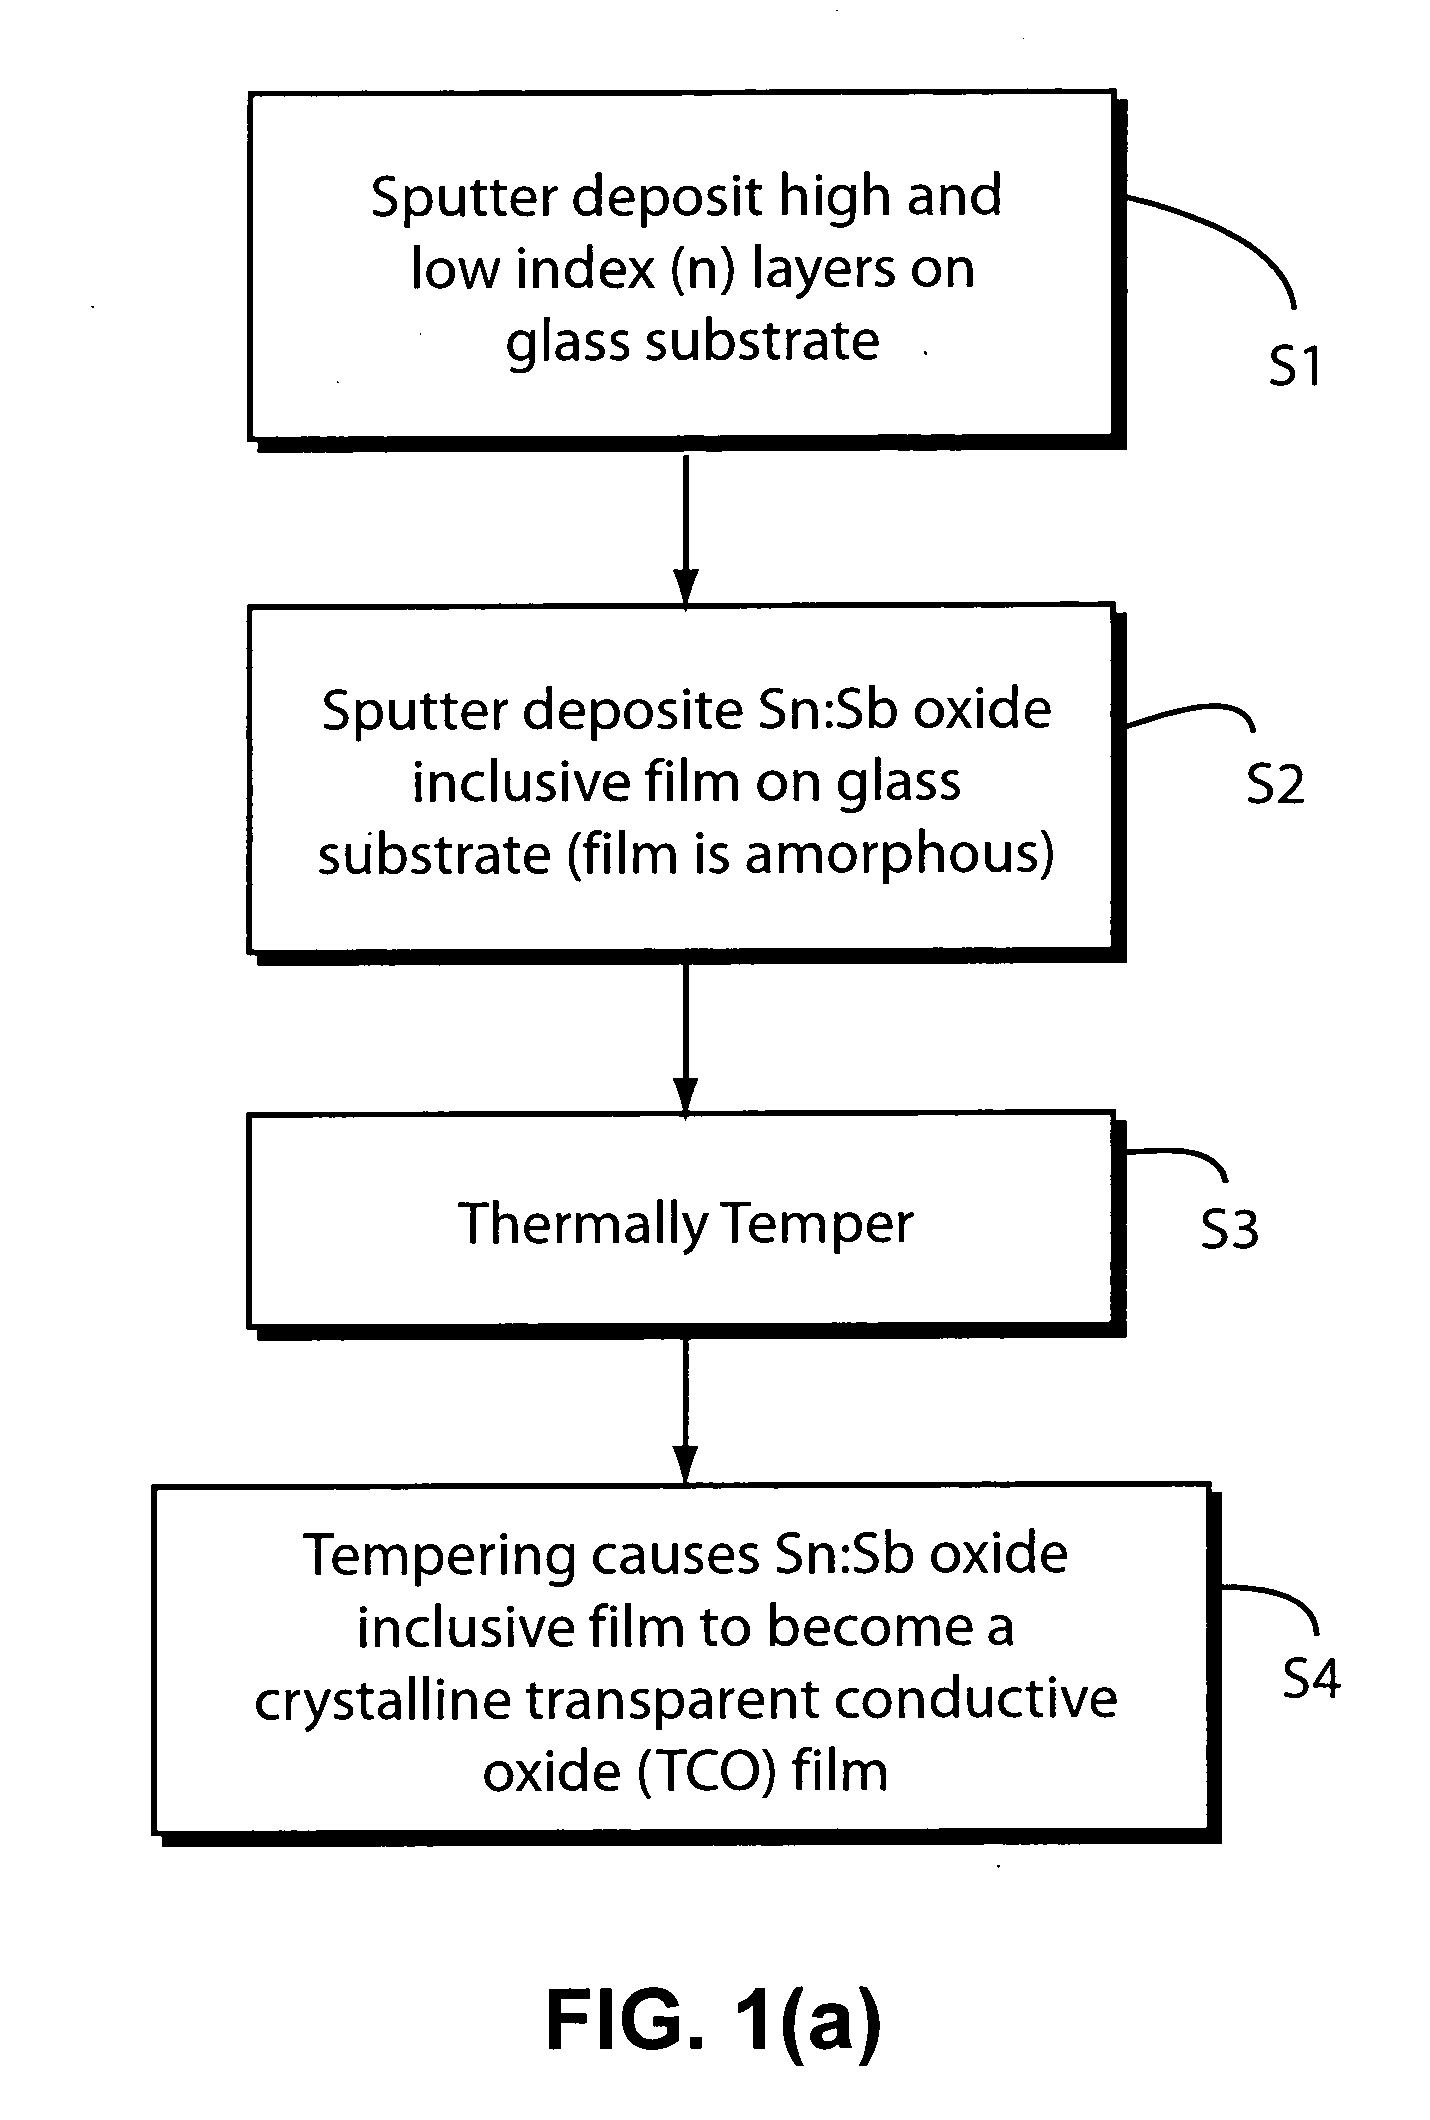 Method of making thermally tempered coated article with transparent conductive oxide (TCO) coating in color compression configuration, and product made using same